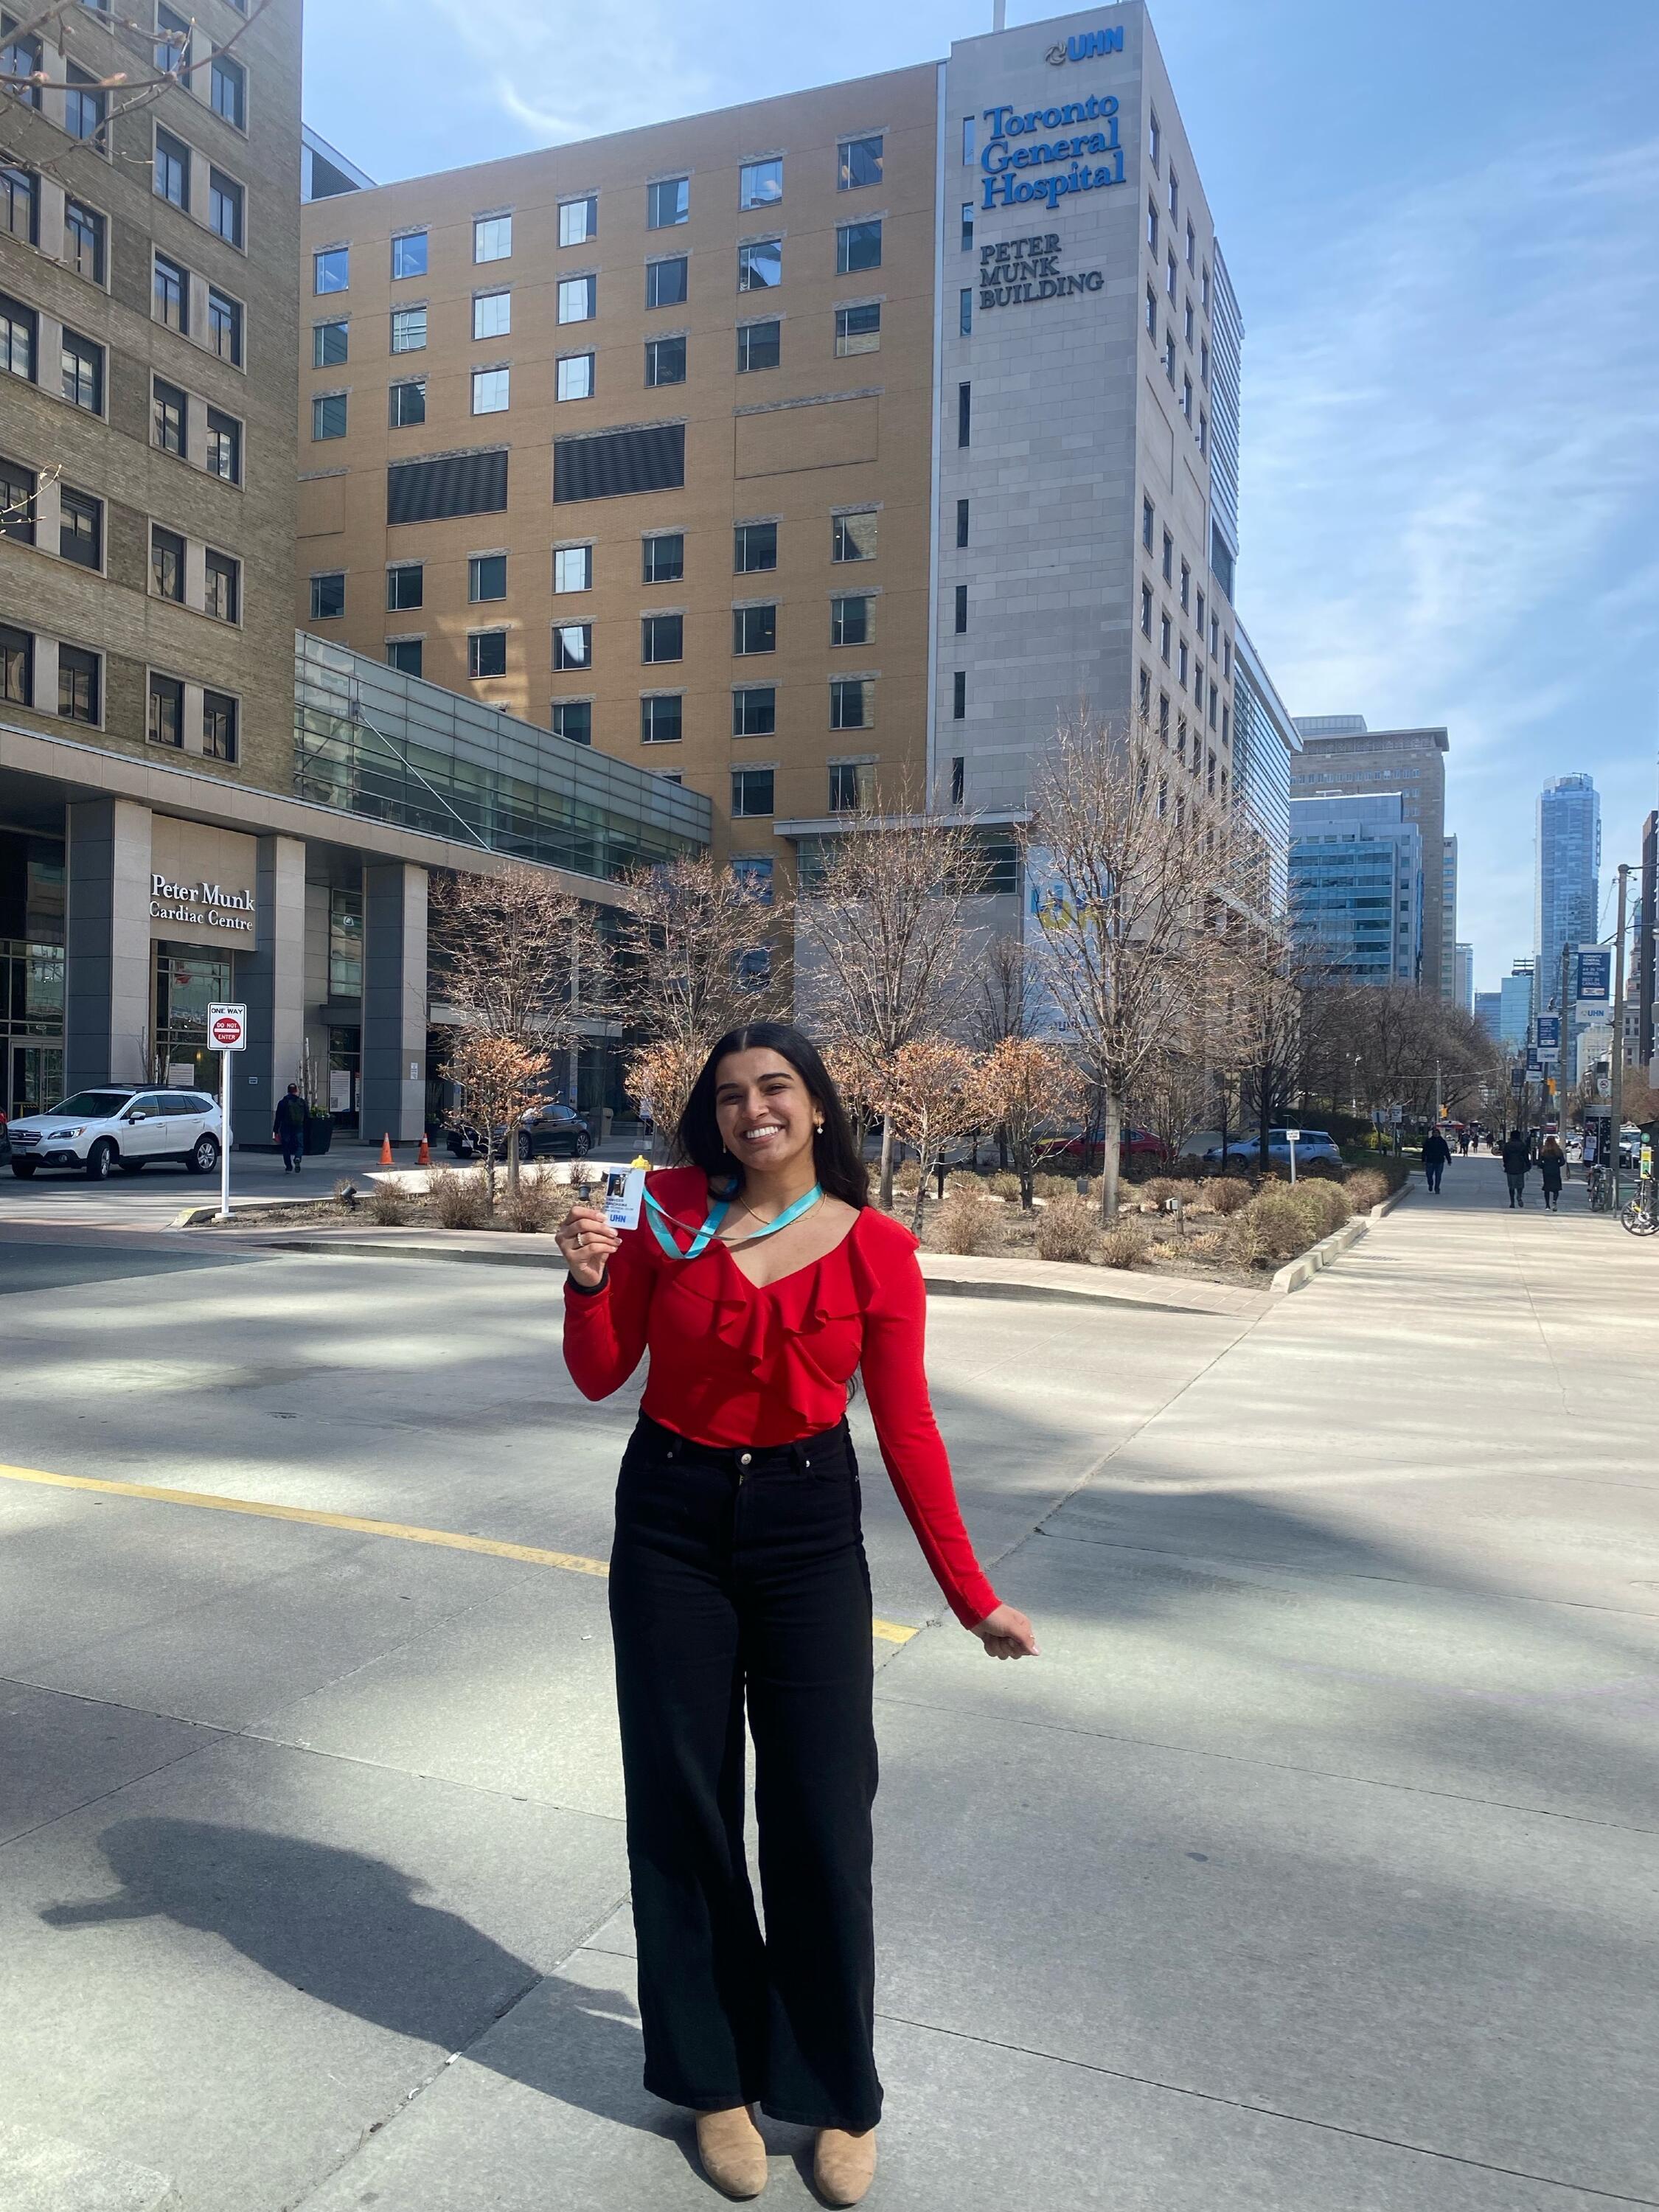 A photo of Tanveer smiling in front of the Toronto General Hospital building.